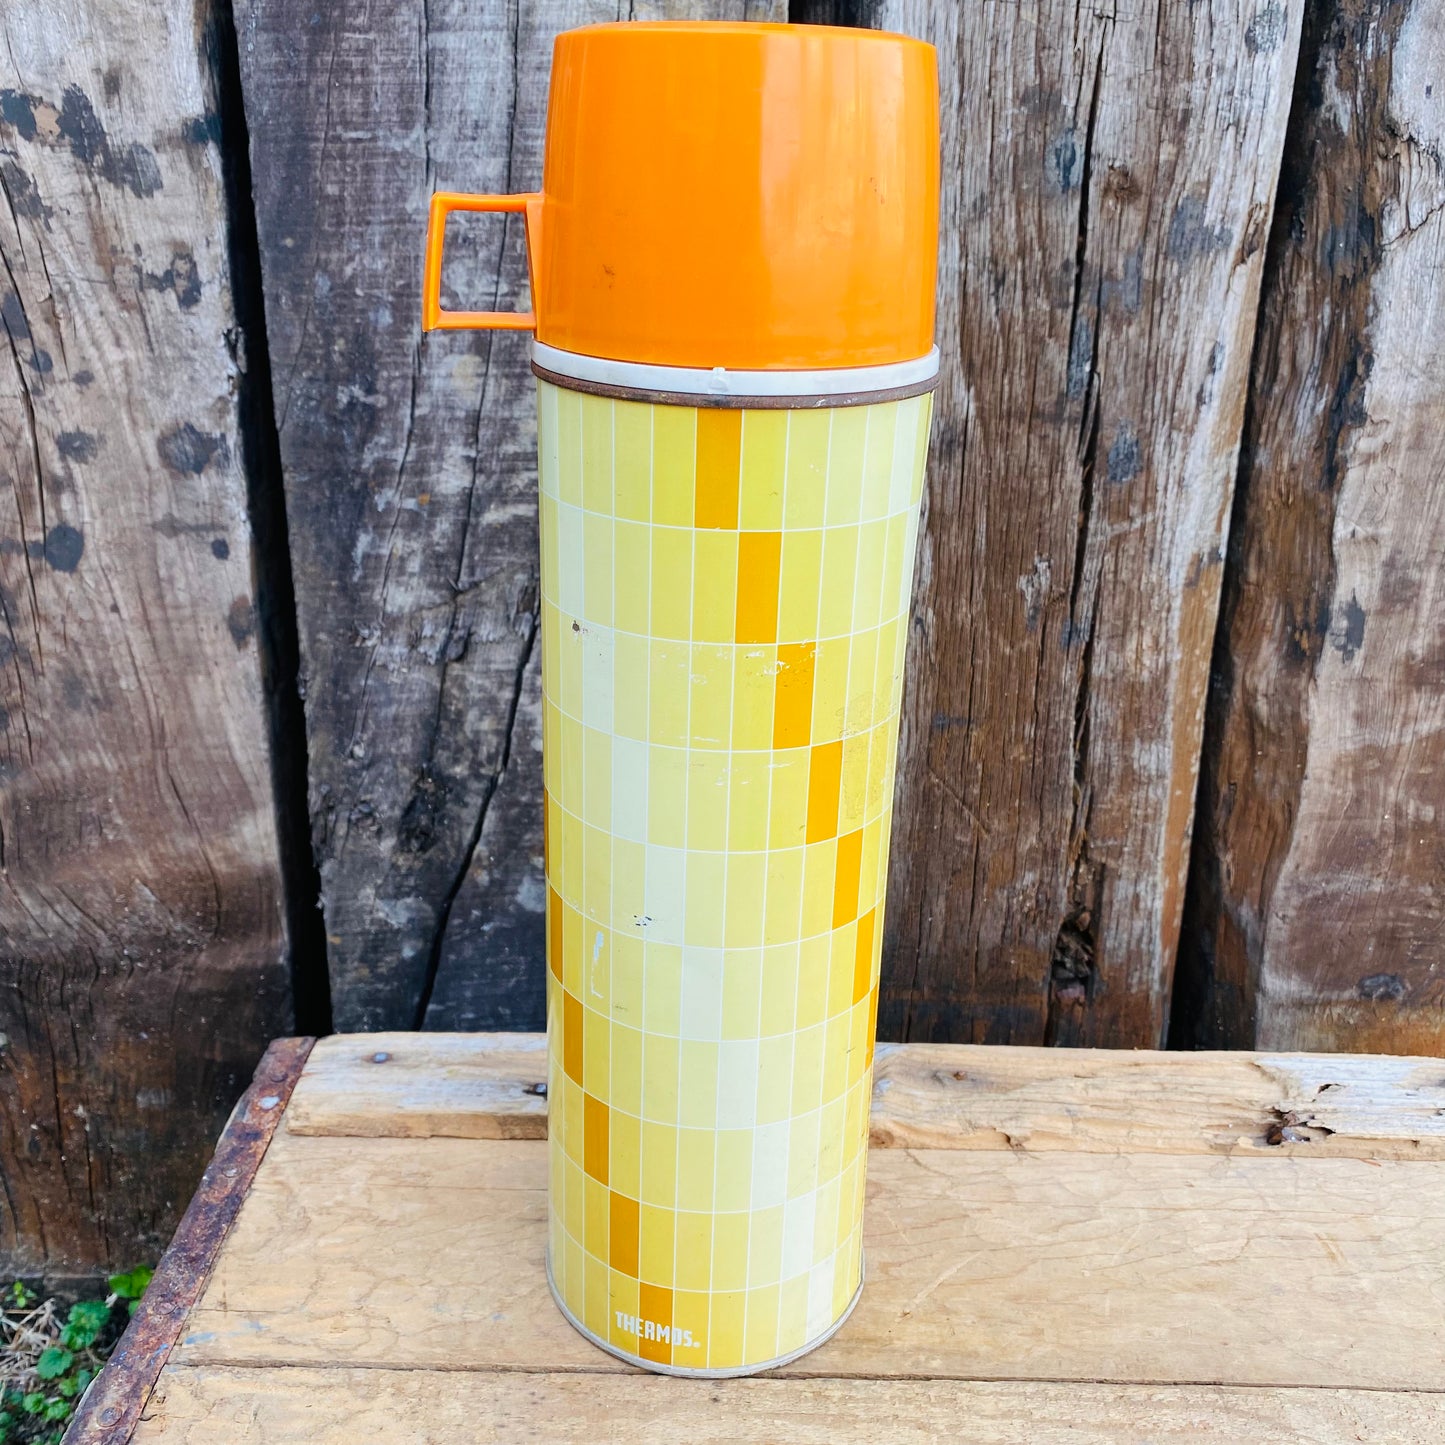 【USA vintage】THERMOS サーモス 水筒 イエロー